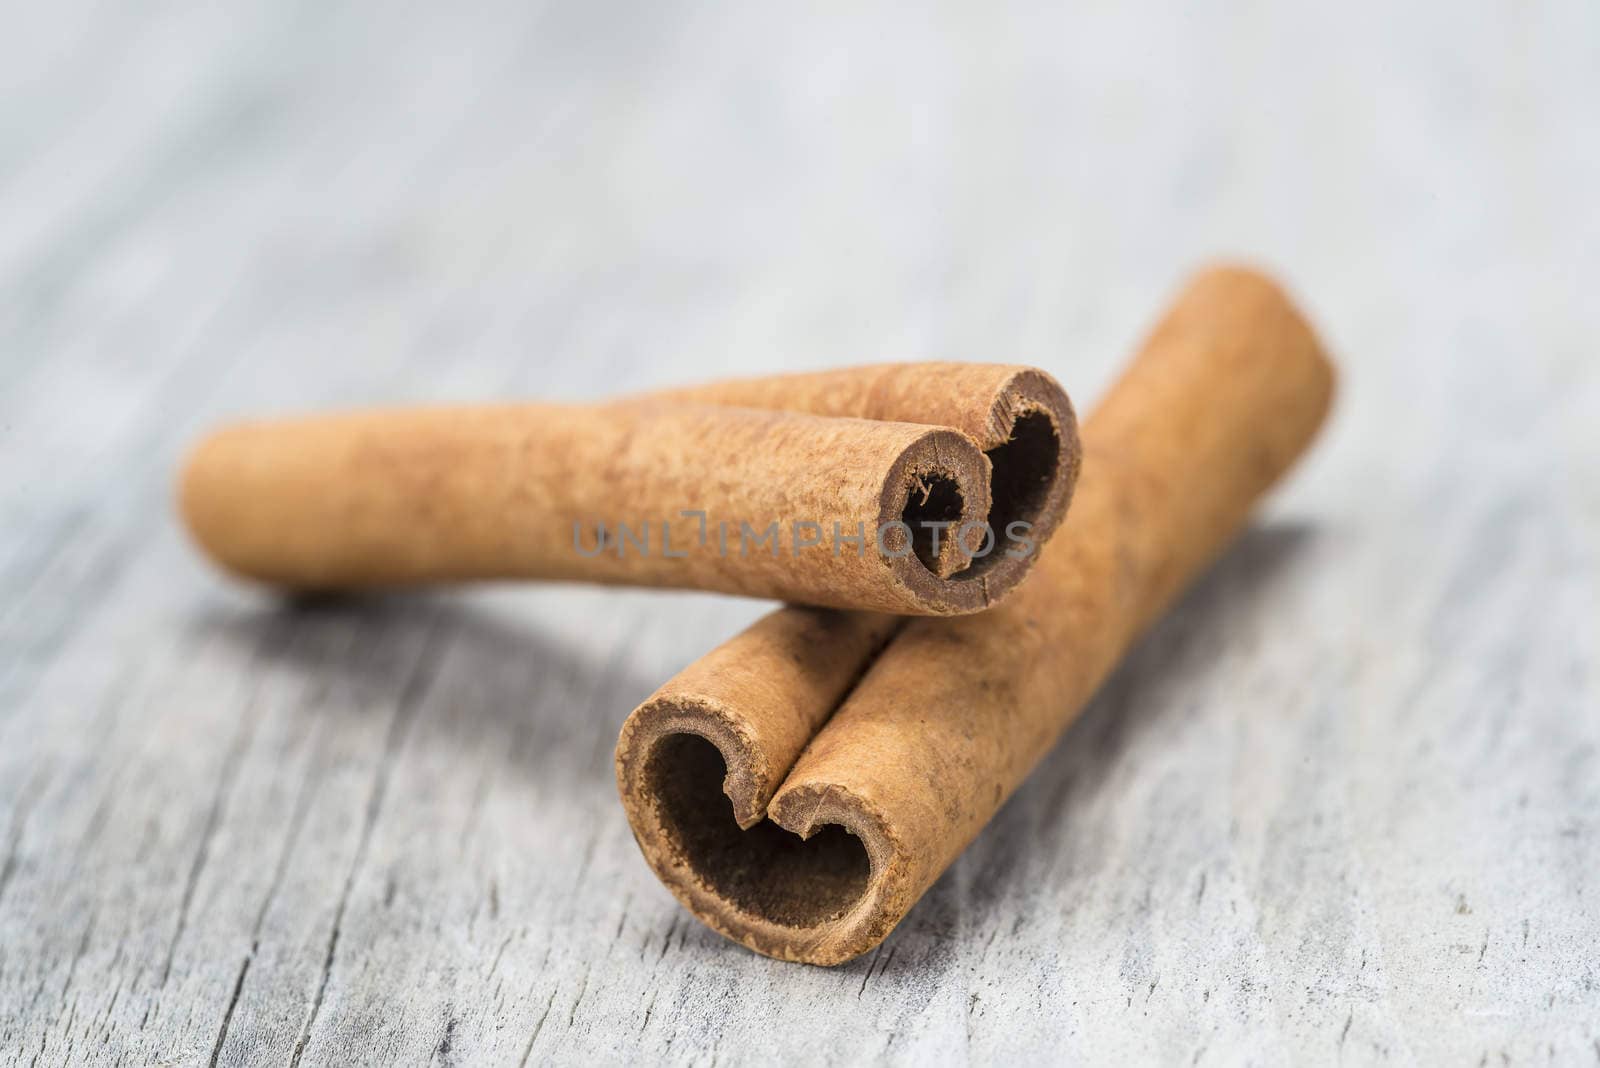 Cinnamon sticks on a wooden background by angelsimon